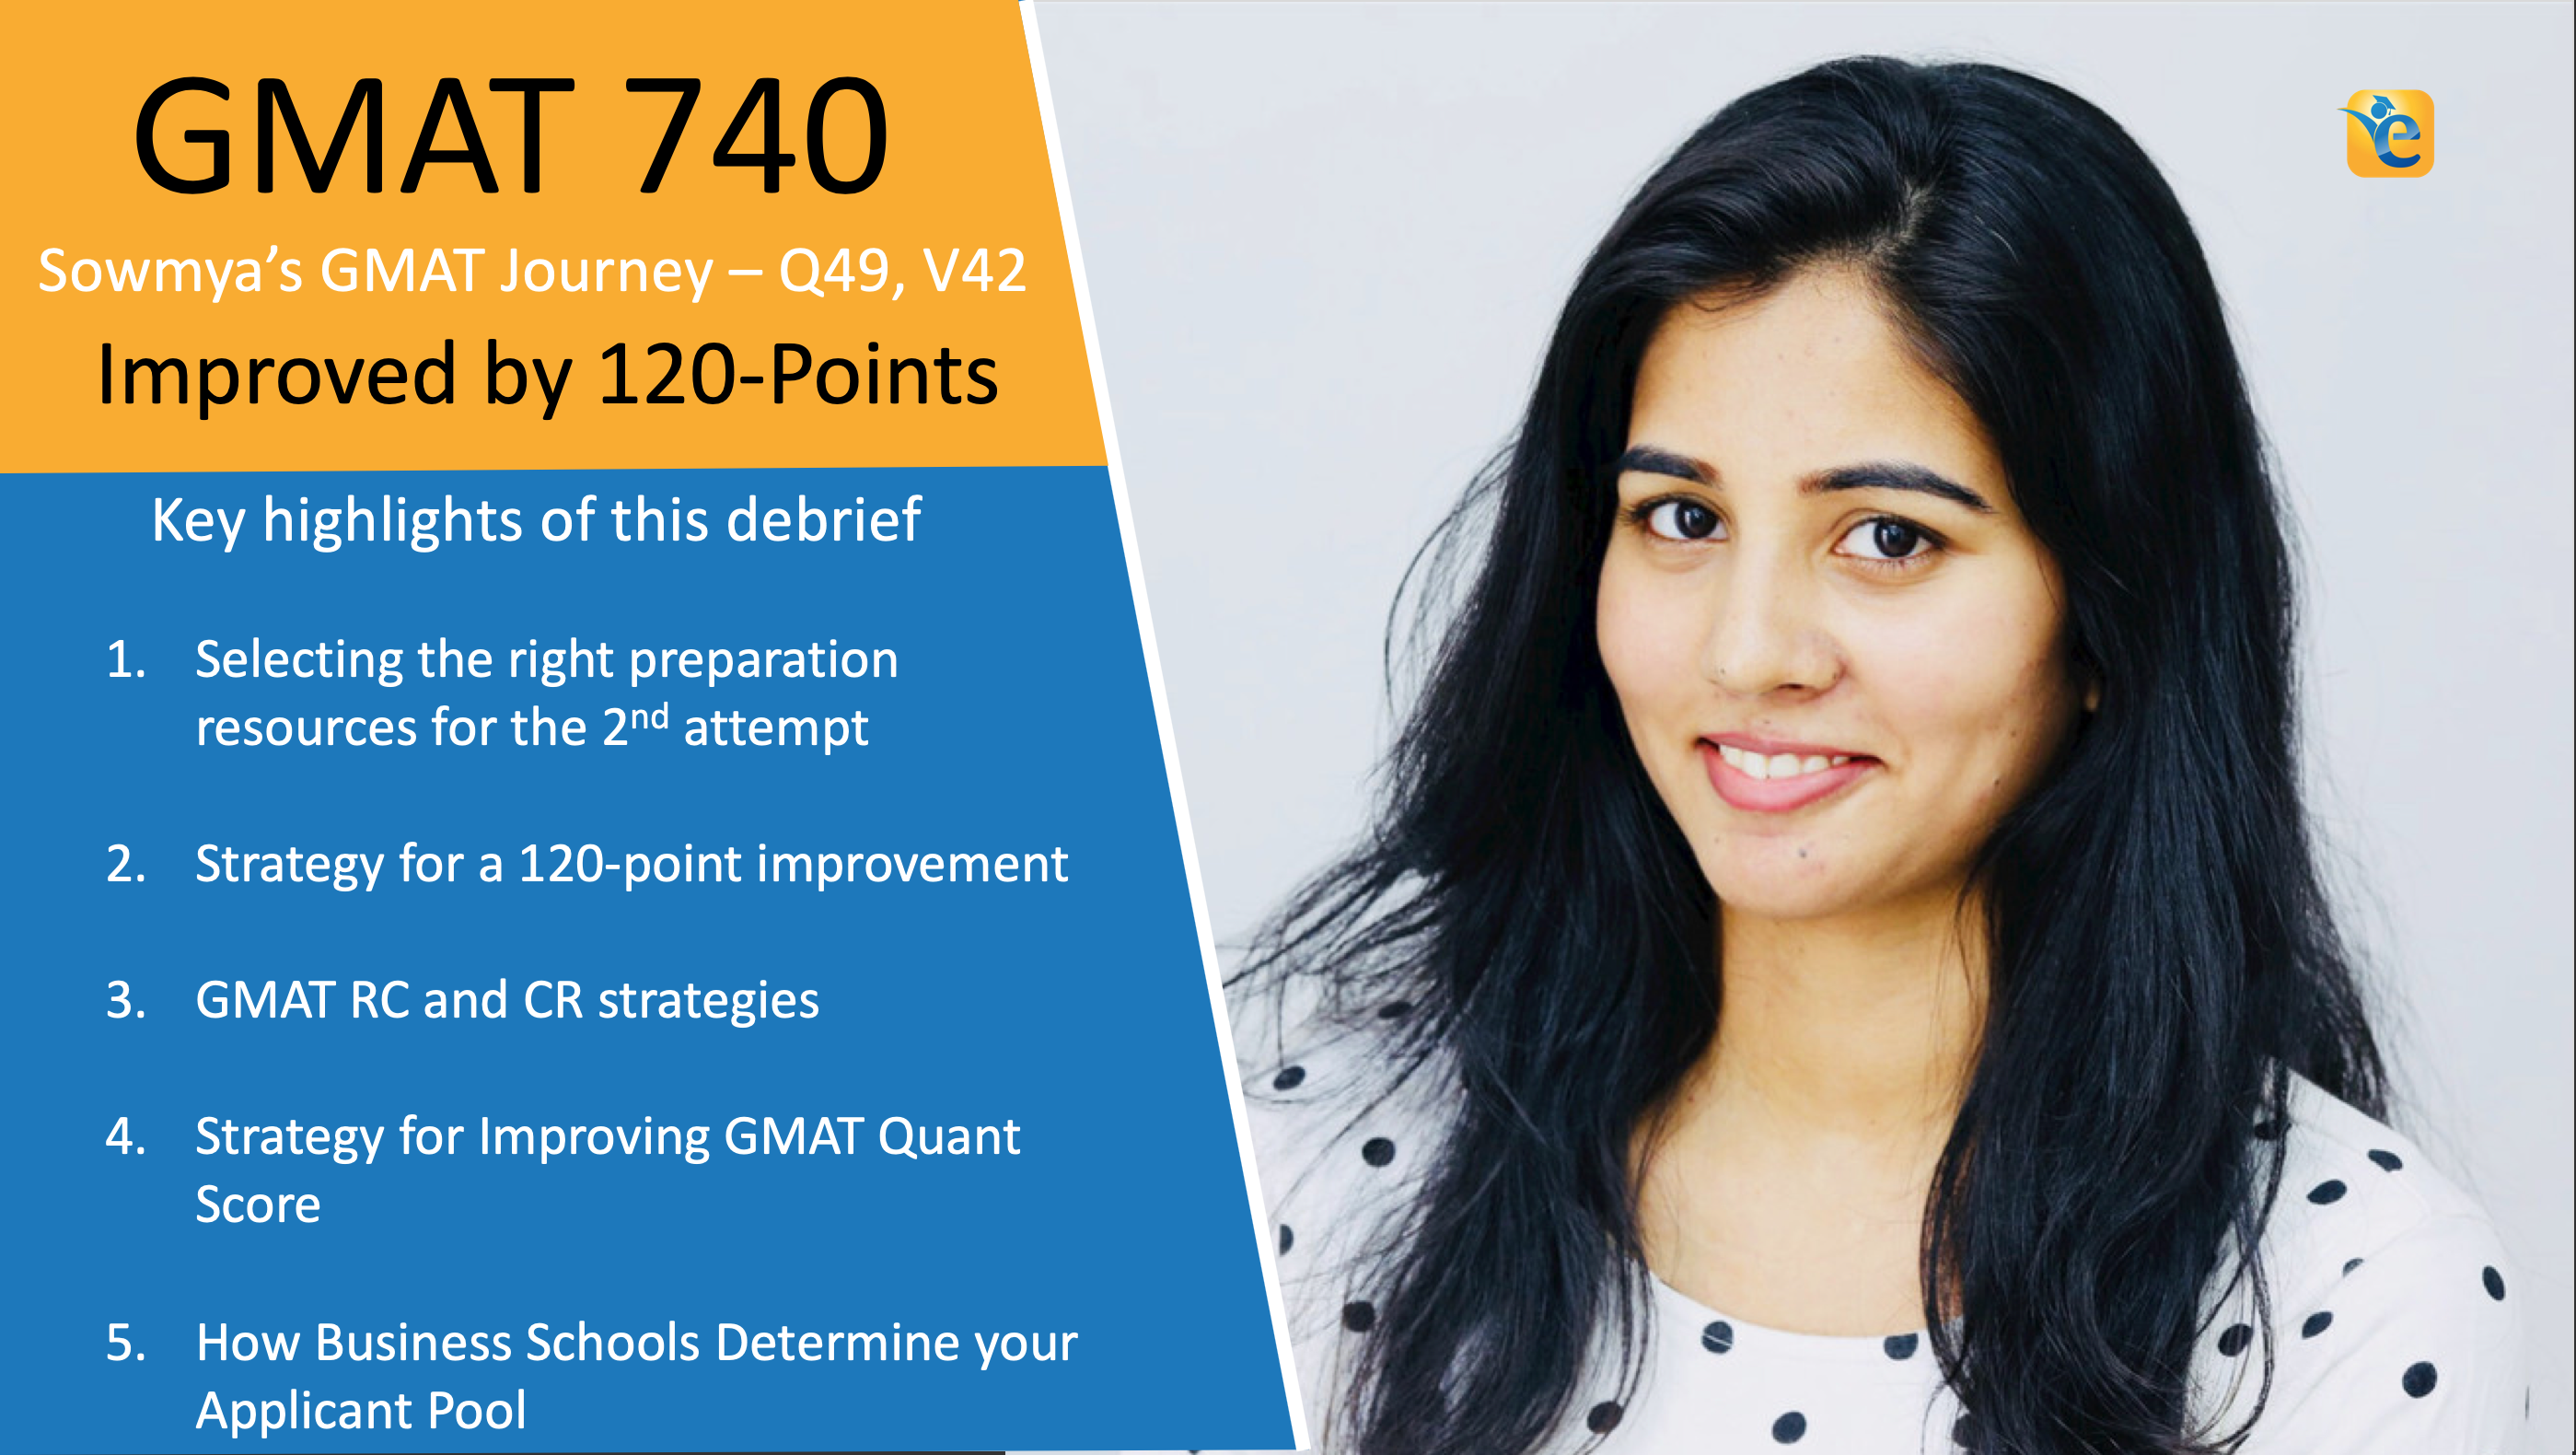 Here’s how Sowmya improved by 120-points – From GMAT 620 (Q44 V32) to 740 (Q49 V42)